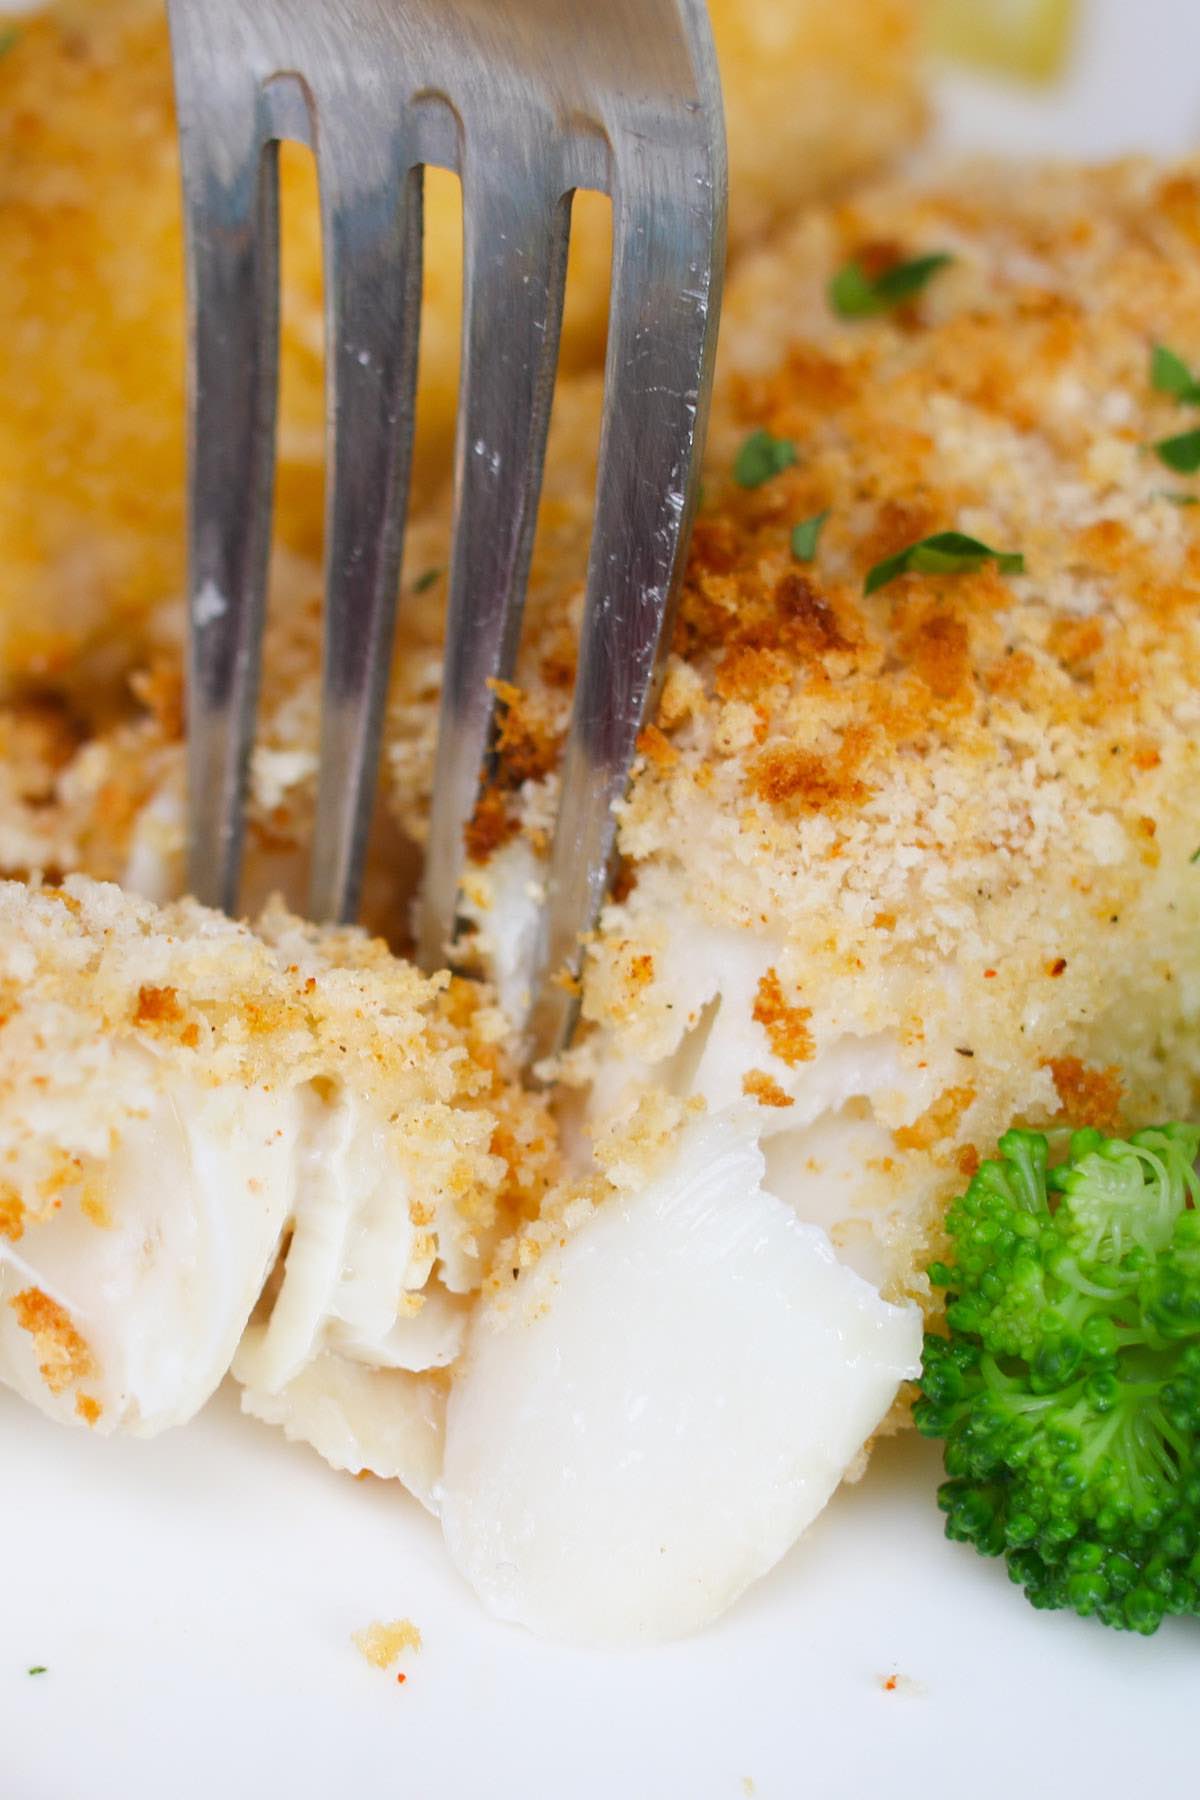 Closeup of perfectly cooked baked haddock with opaque flesh that is flaking easily with a fork